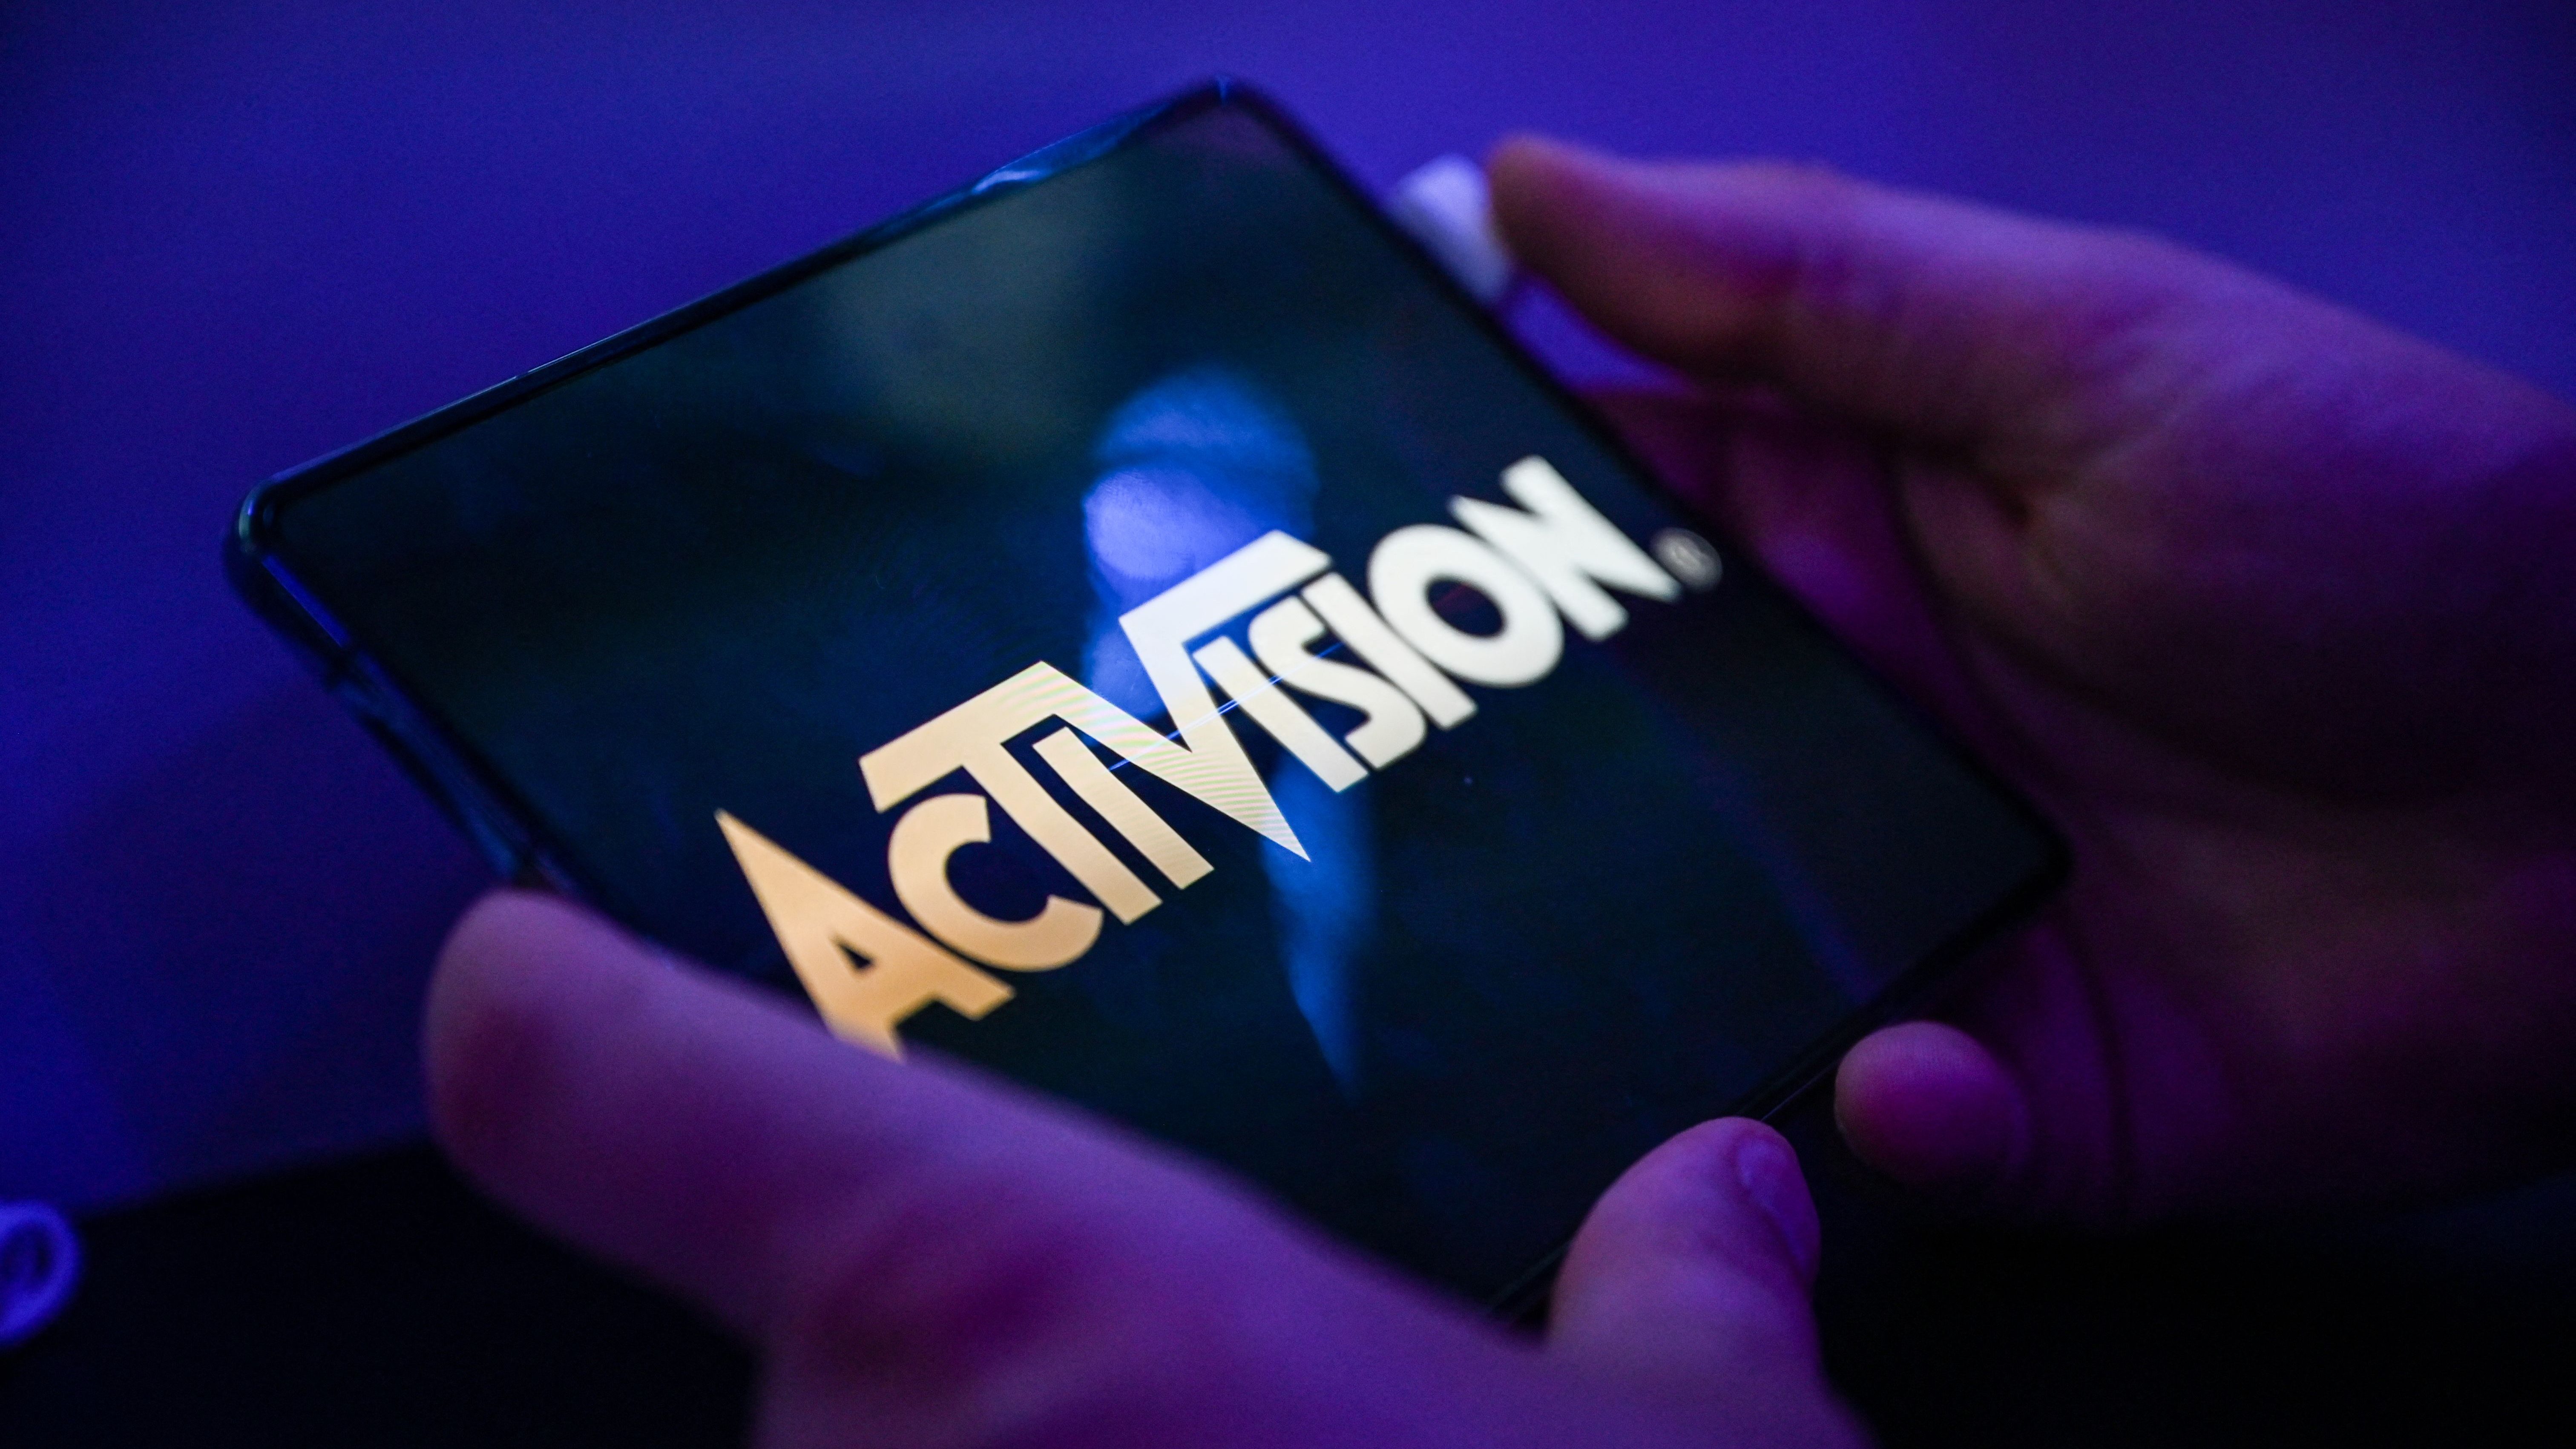 FTC Seeks to Block Microsoft's Acquisition of Activision Blizzard